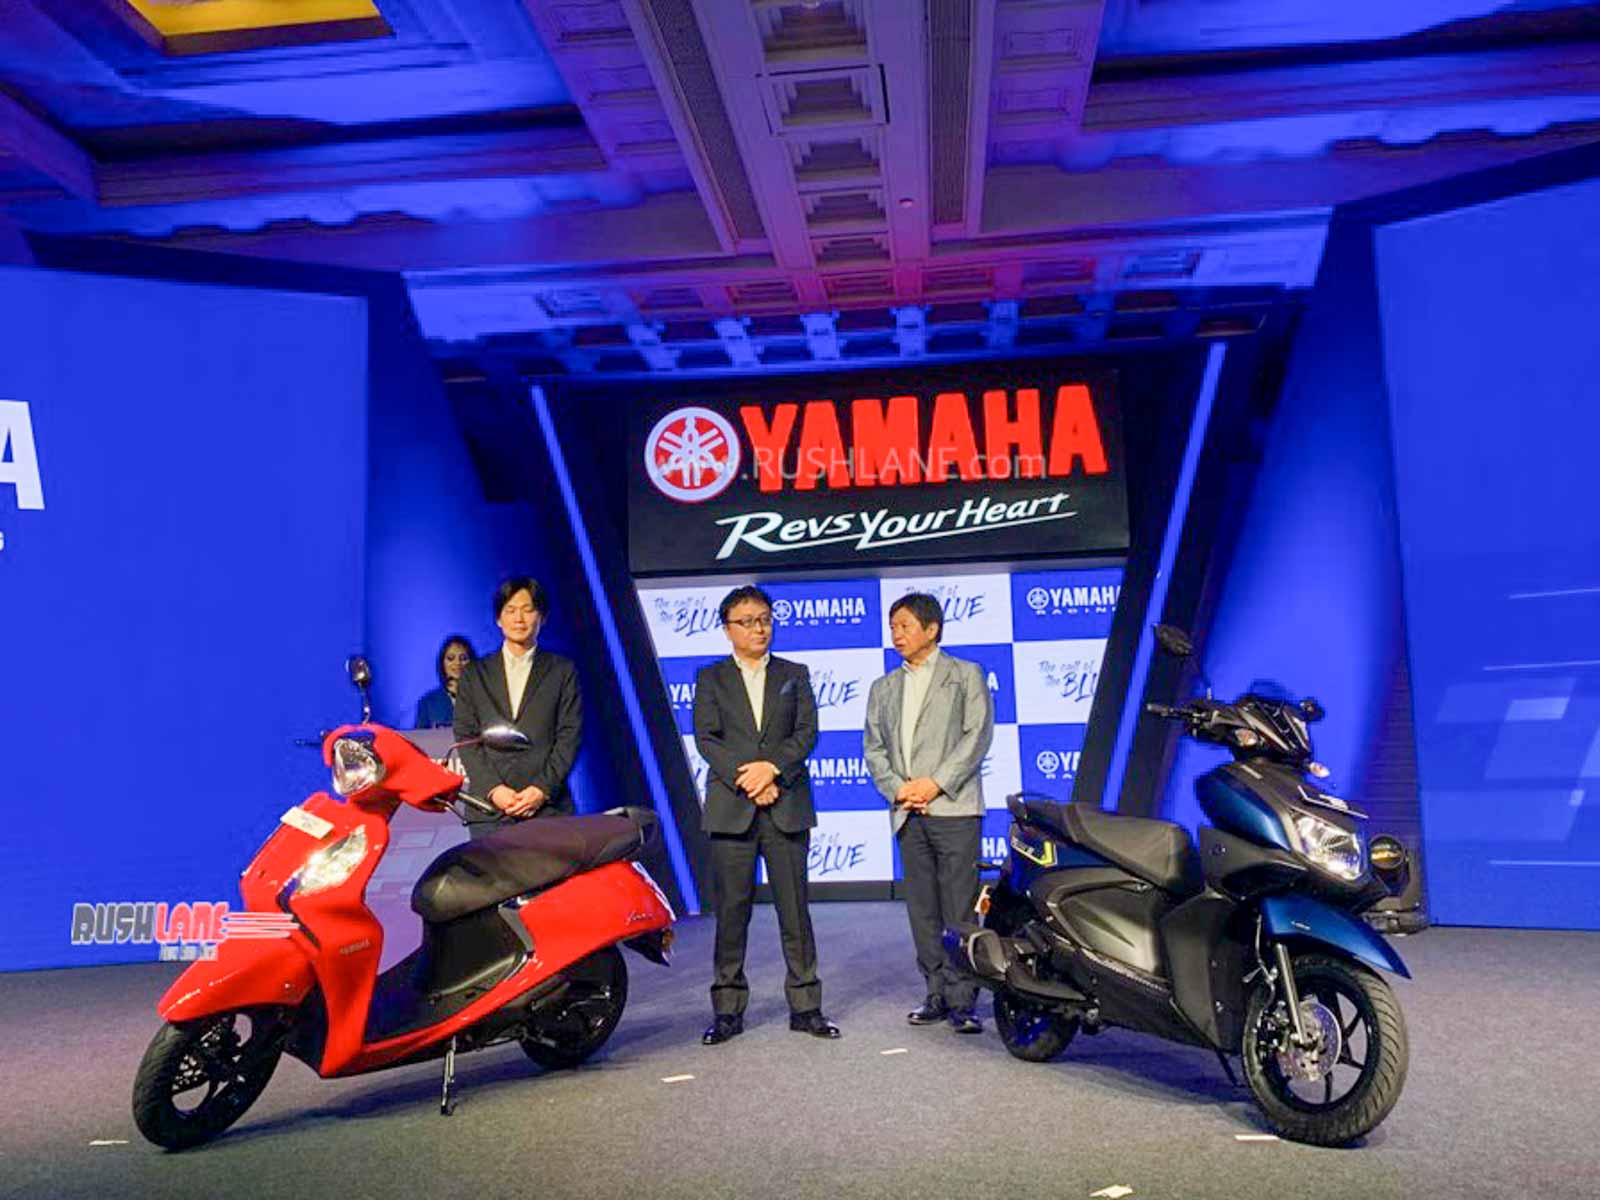 2020 Yamaha Ray Zr Bs6 Scooter Debuts With 125cc Fi Engine